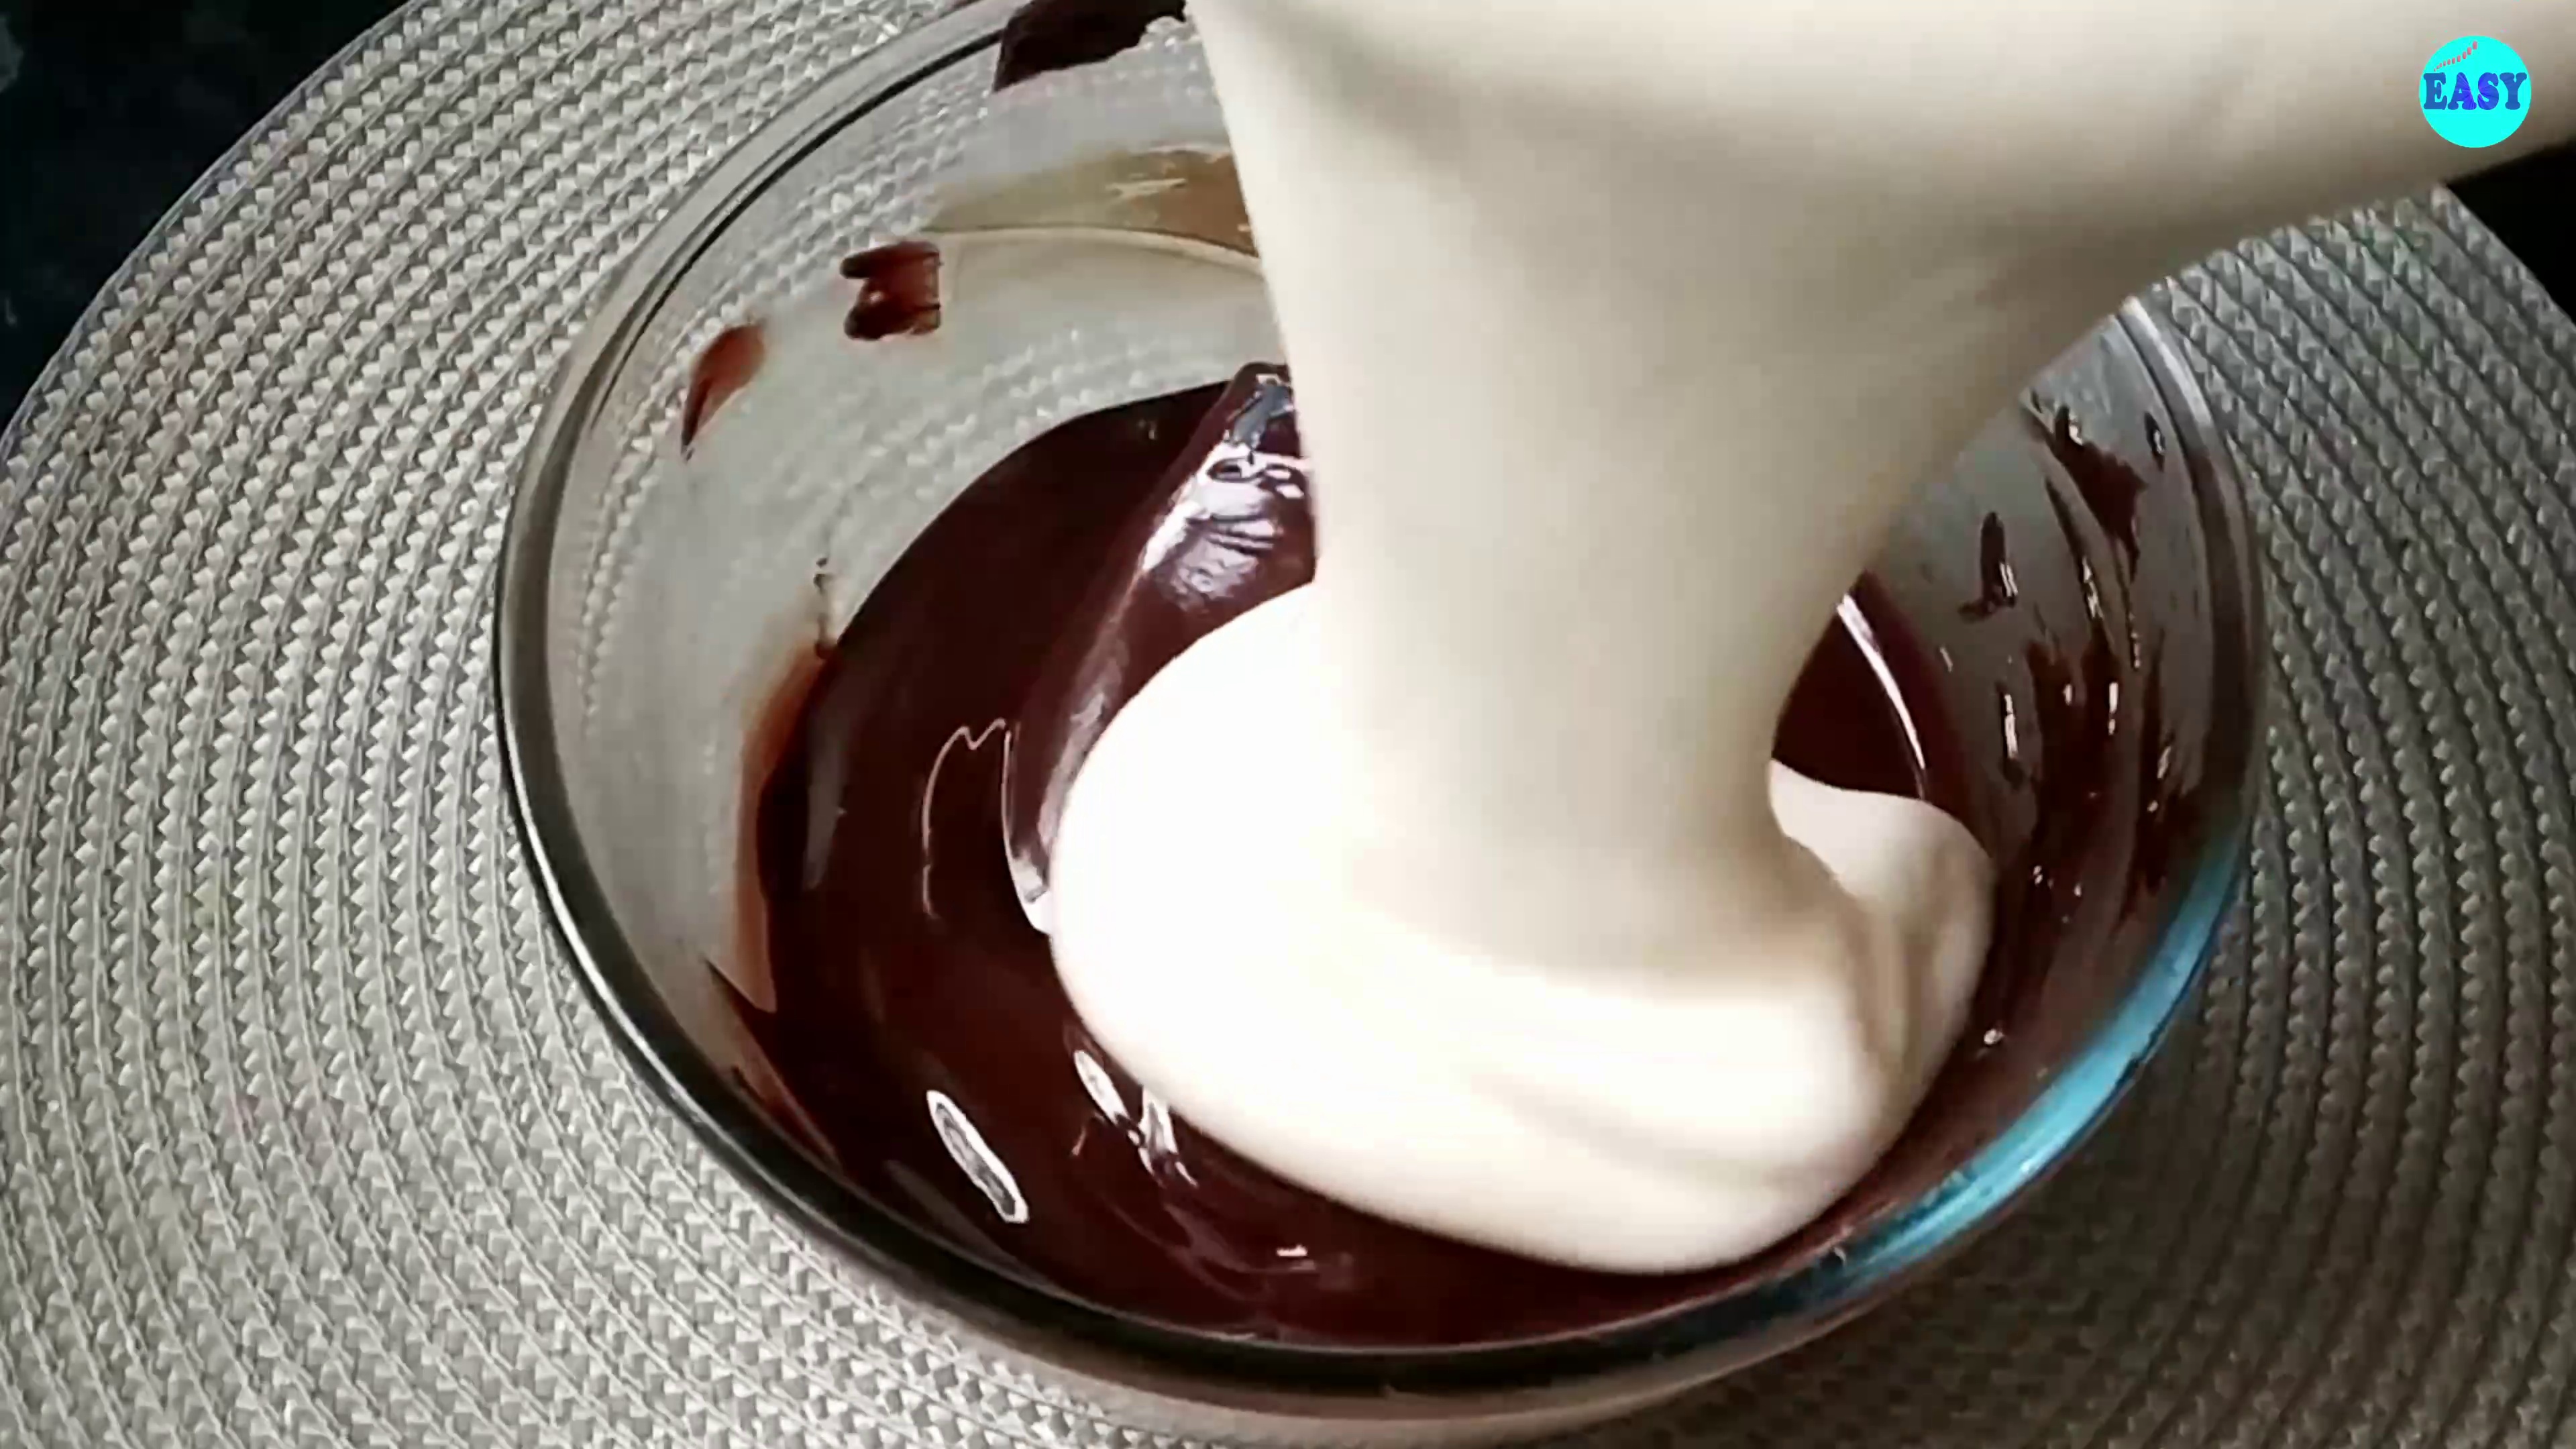 Step 7 - Now add some of the egg mixture to the chocolate mix that we melted earlier. Mix it gently without deflating the eggs. It will help to lighten up the chocolate mixture, so once we add it to the remaining eggs it will be easier to mix.